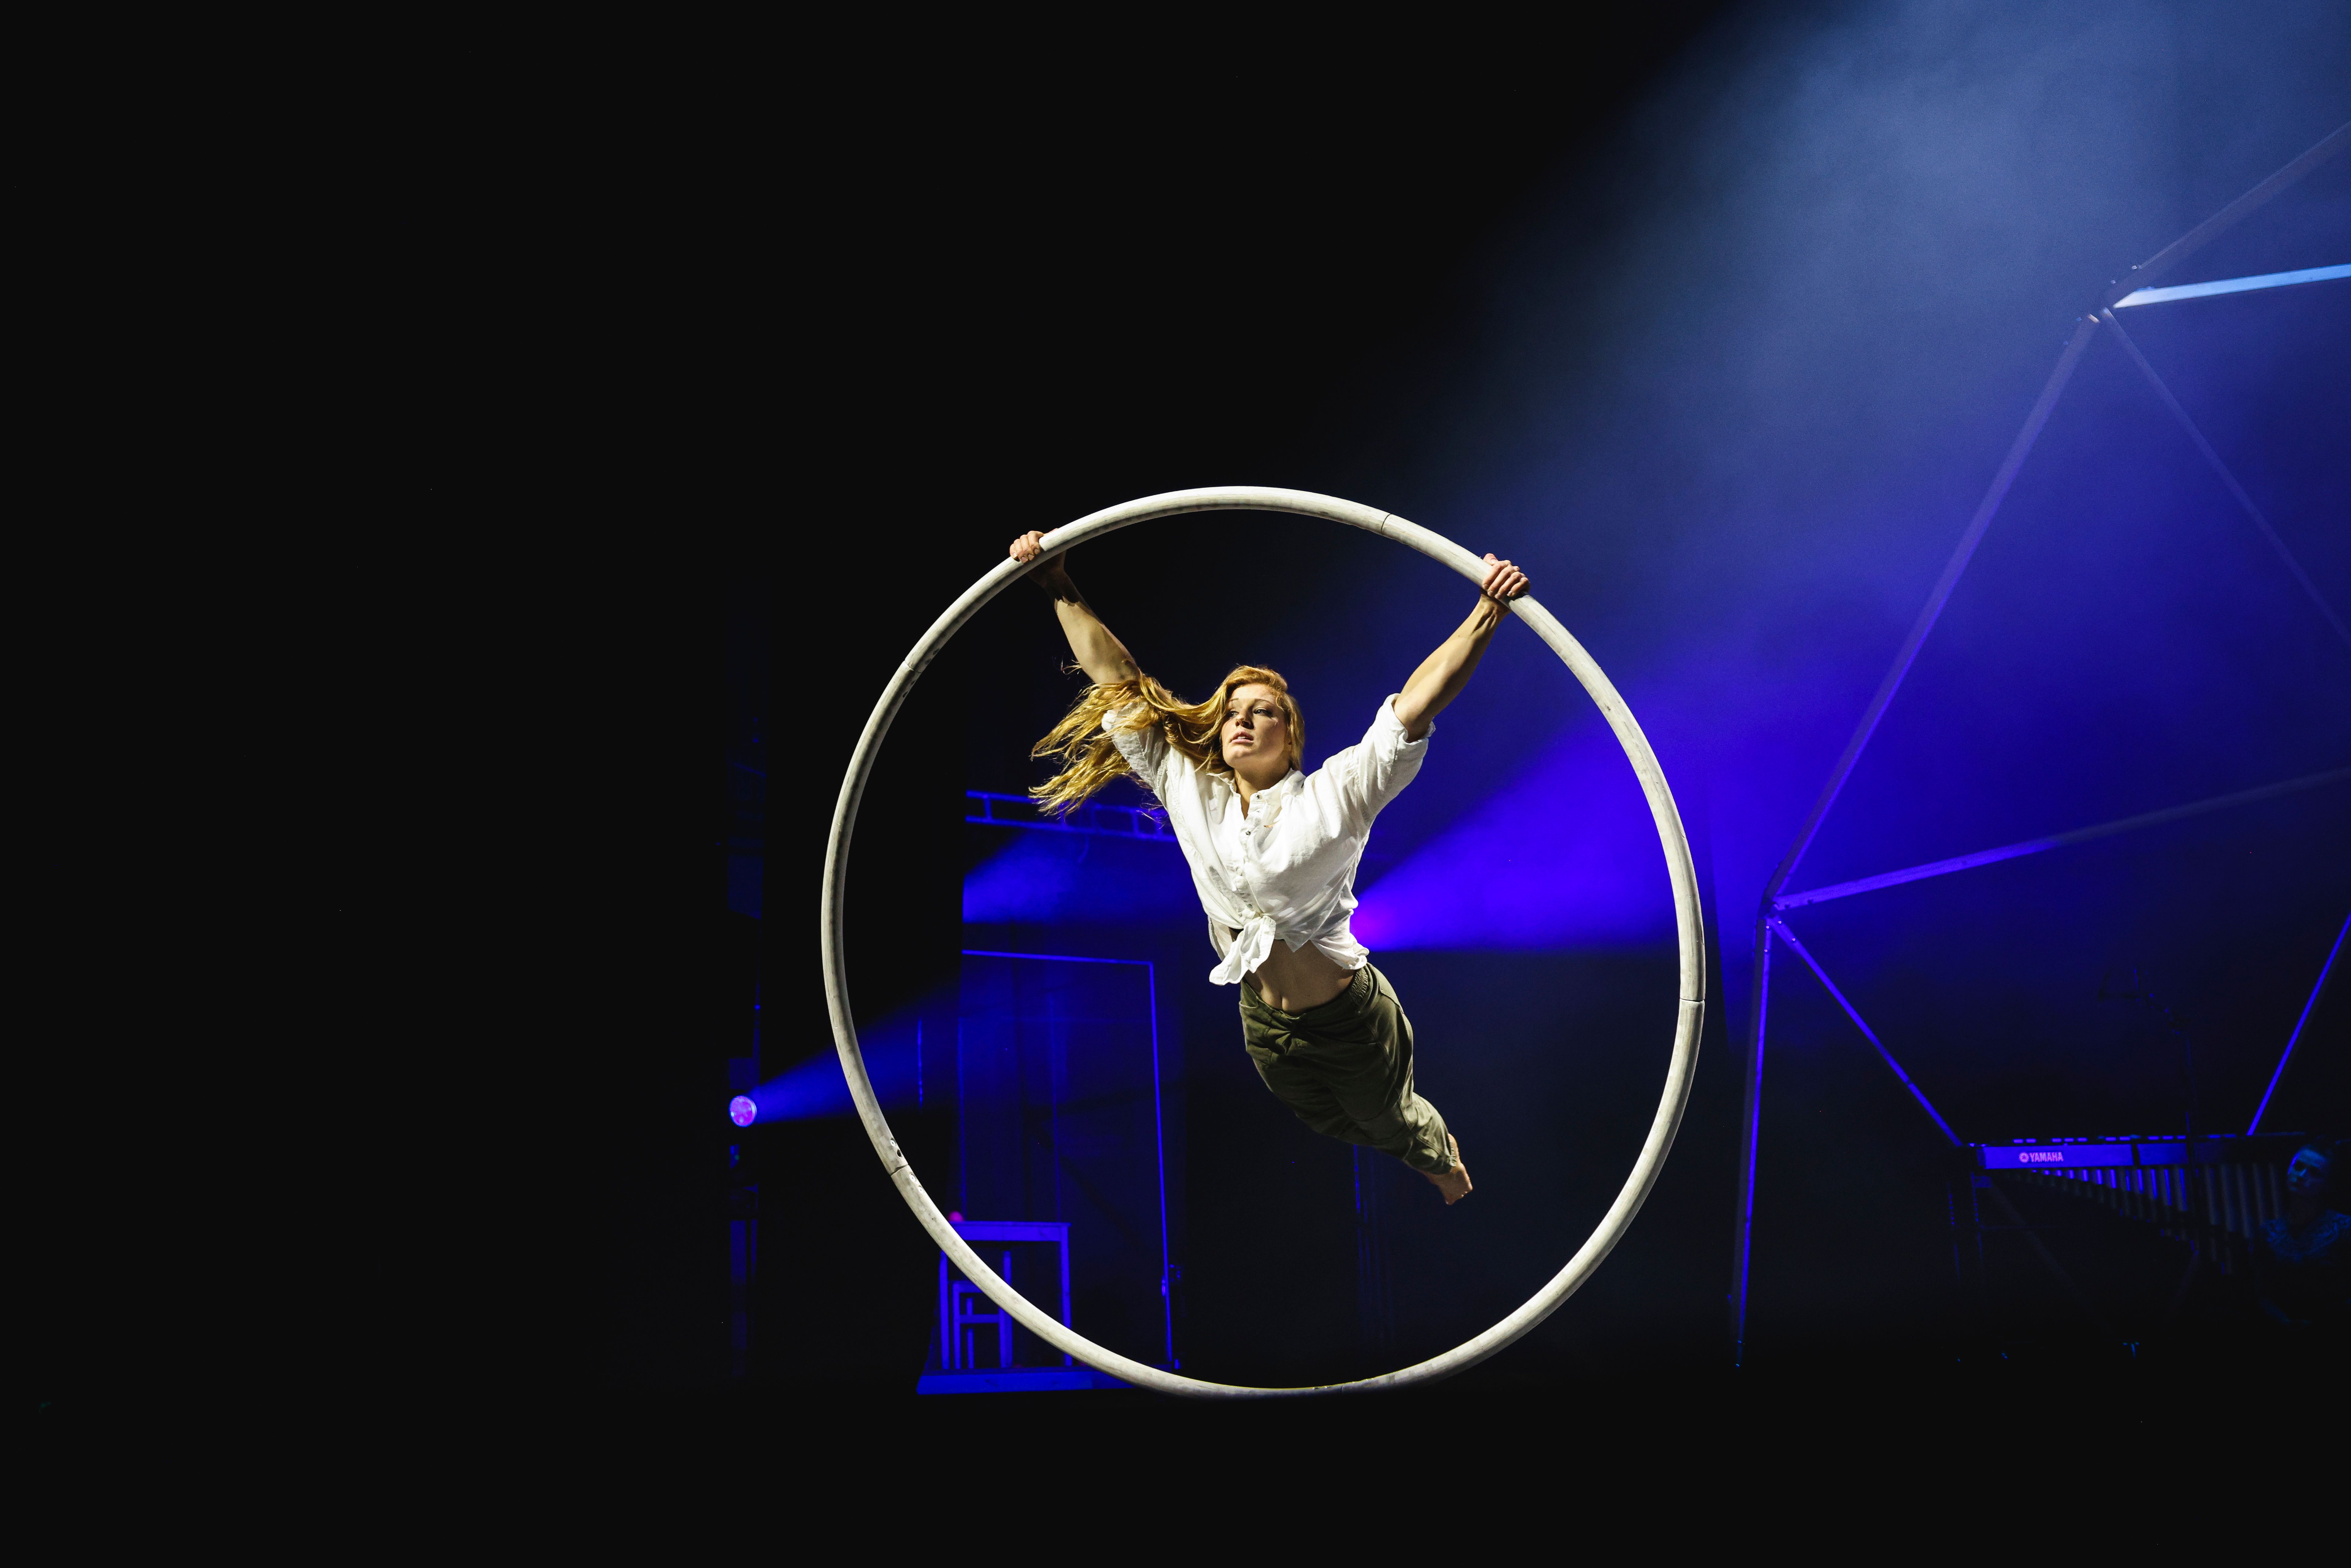 You can see an acrobat with a Cyr wheel.